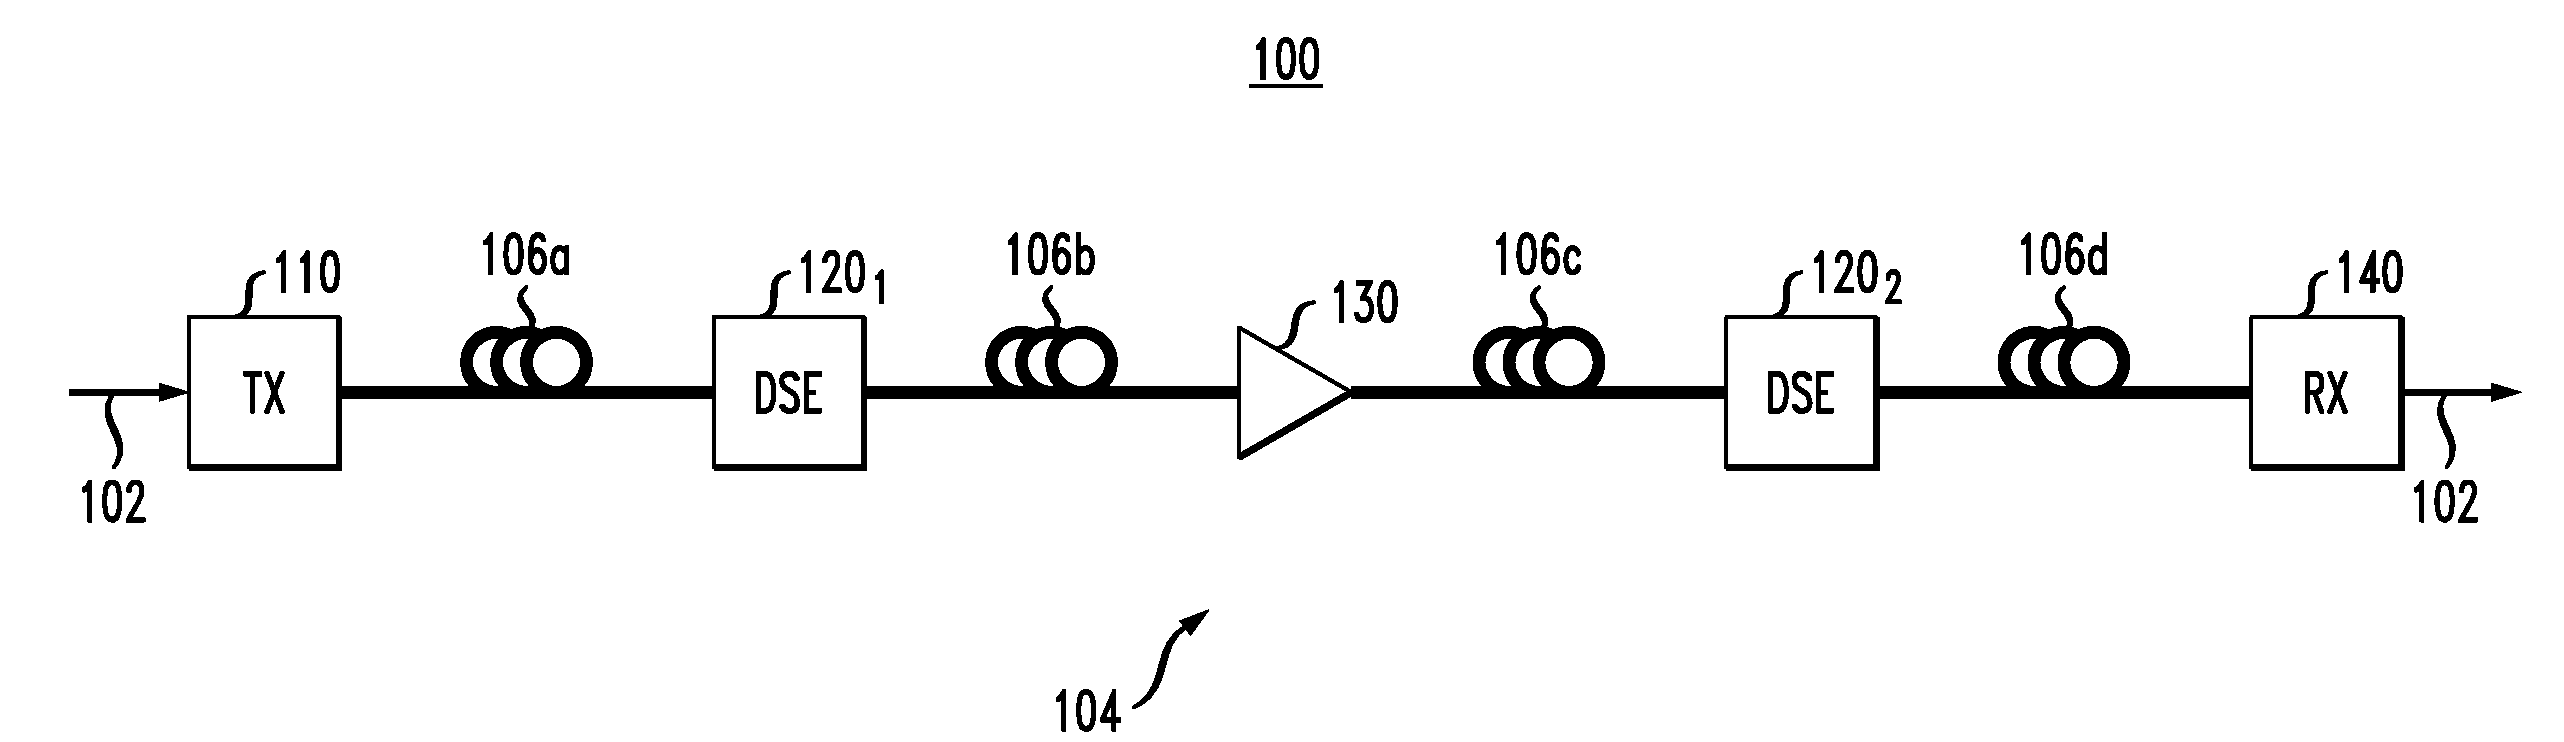 Multipath channel for optical subcarrier modulation